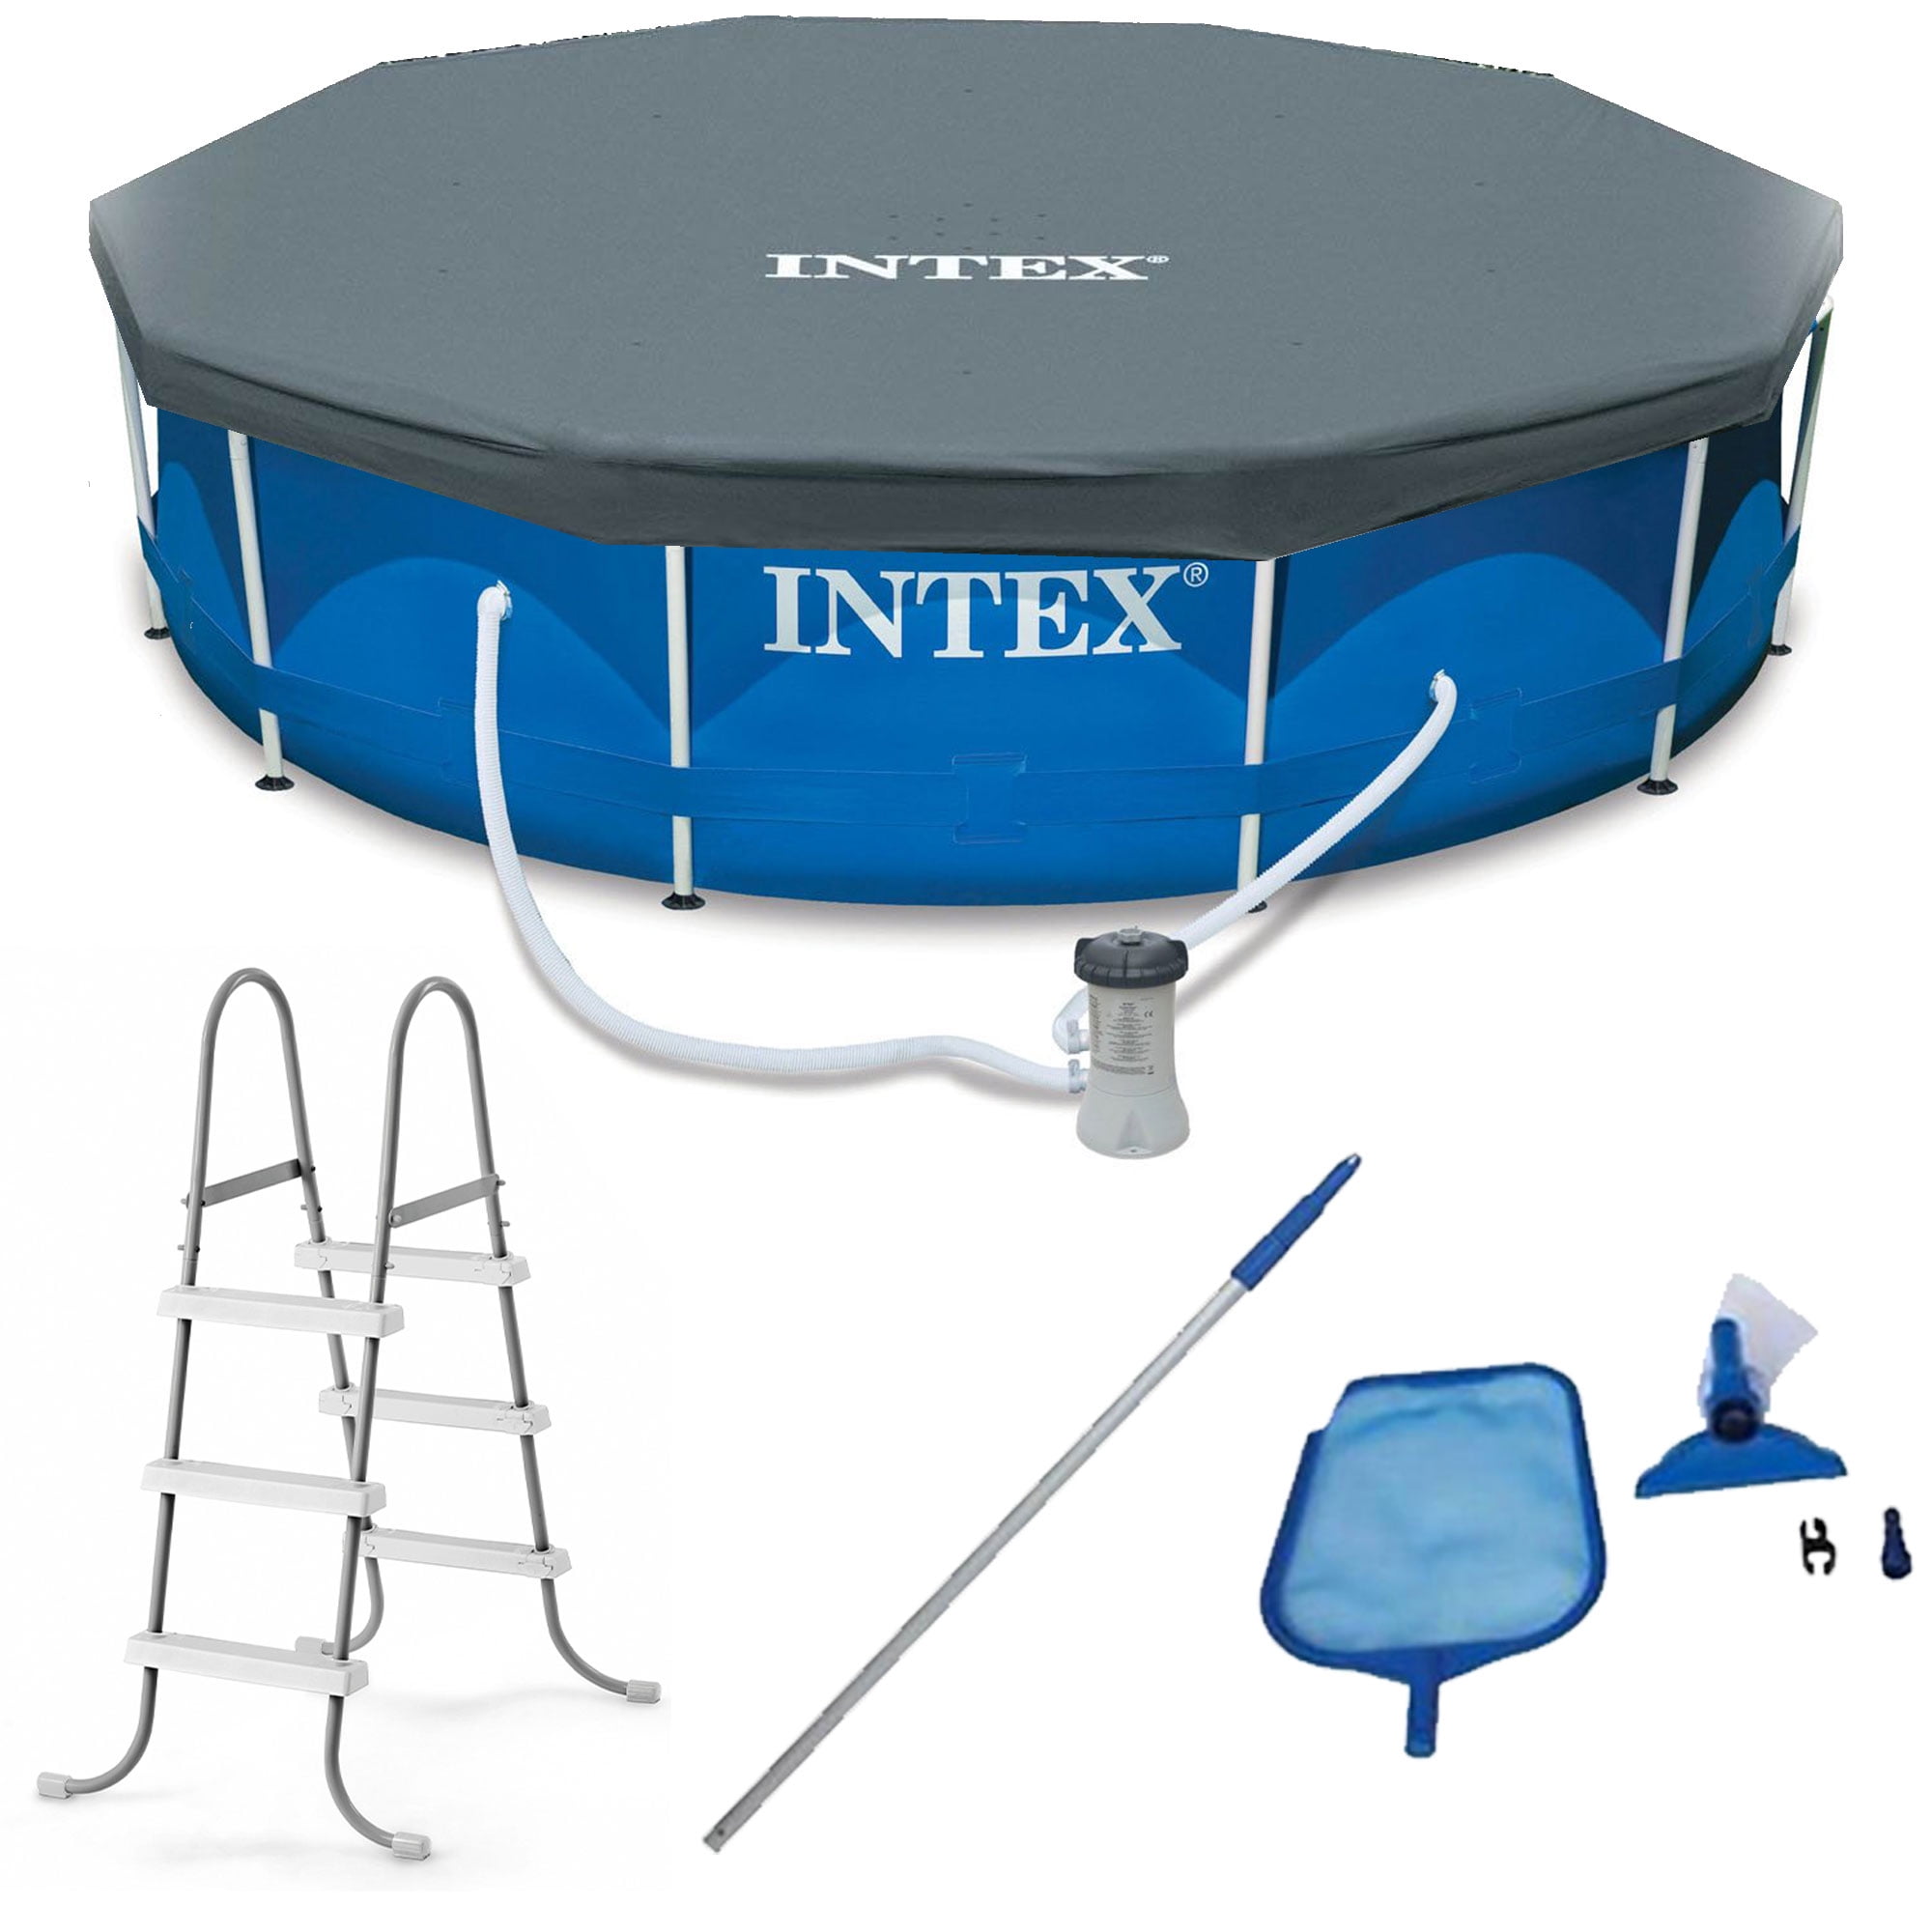 Intex 12 x 2.5 Metal Frame Above Ground with Filter and Accessories - Walmart.com